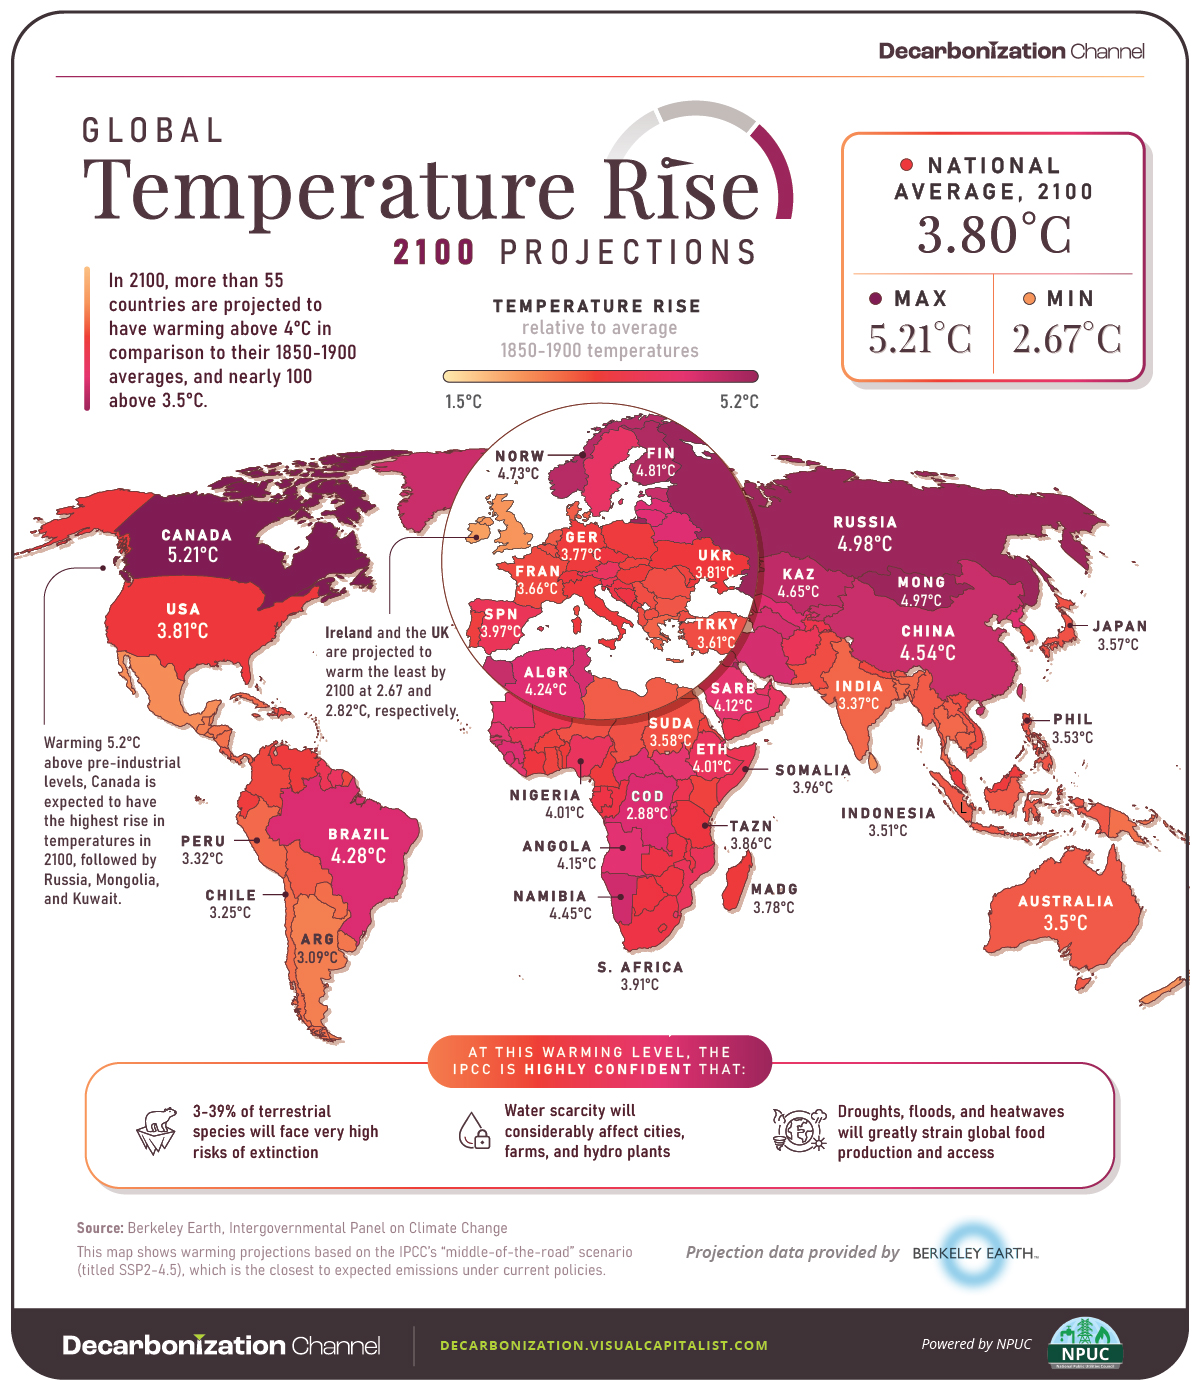 global temperature rise by country 2100